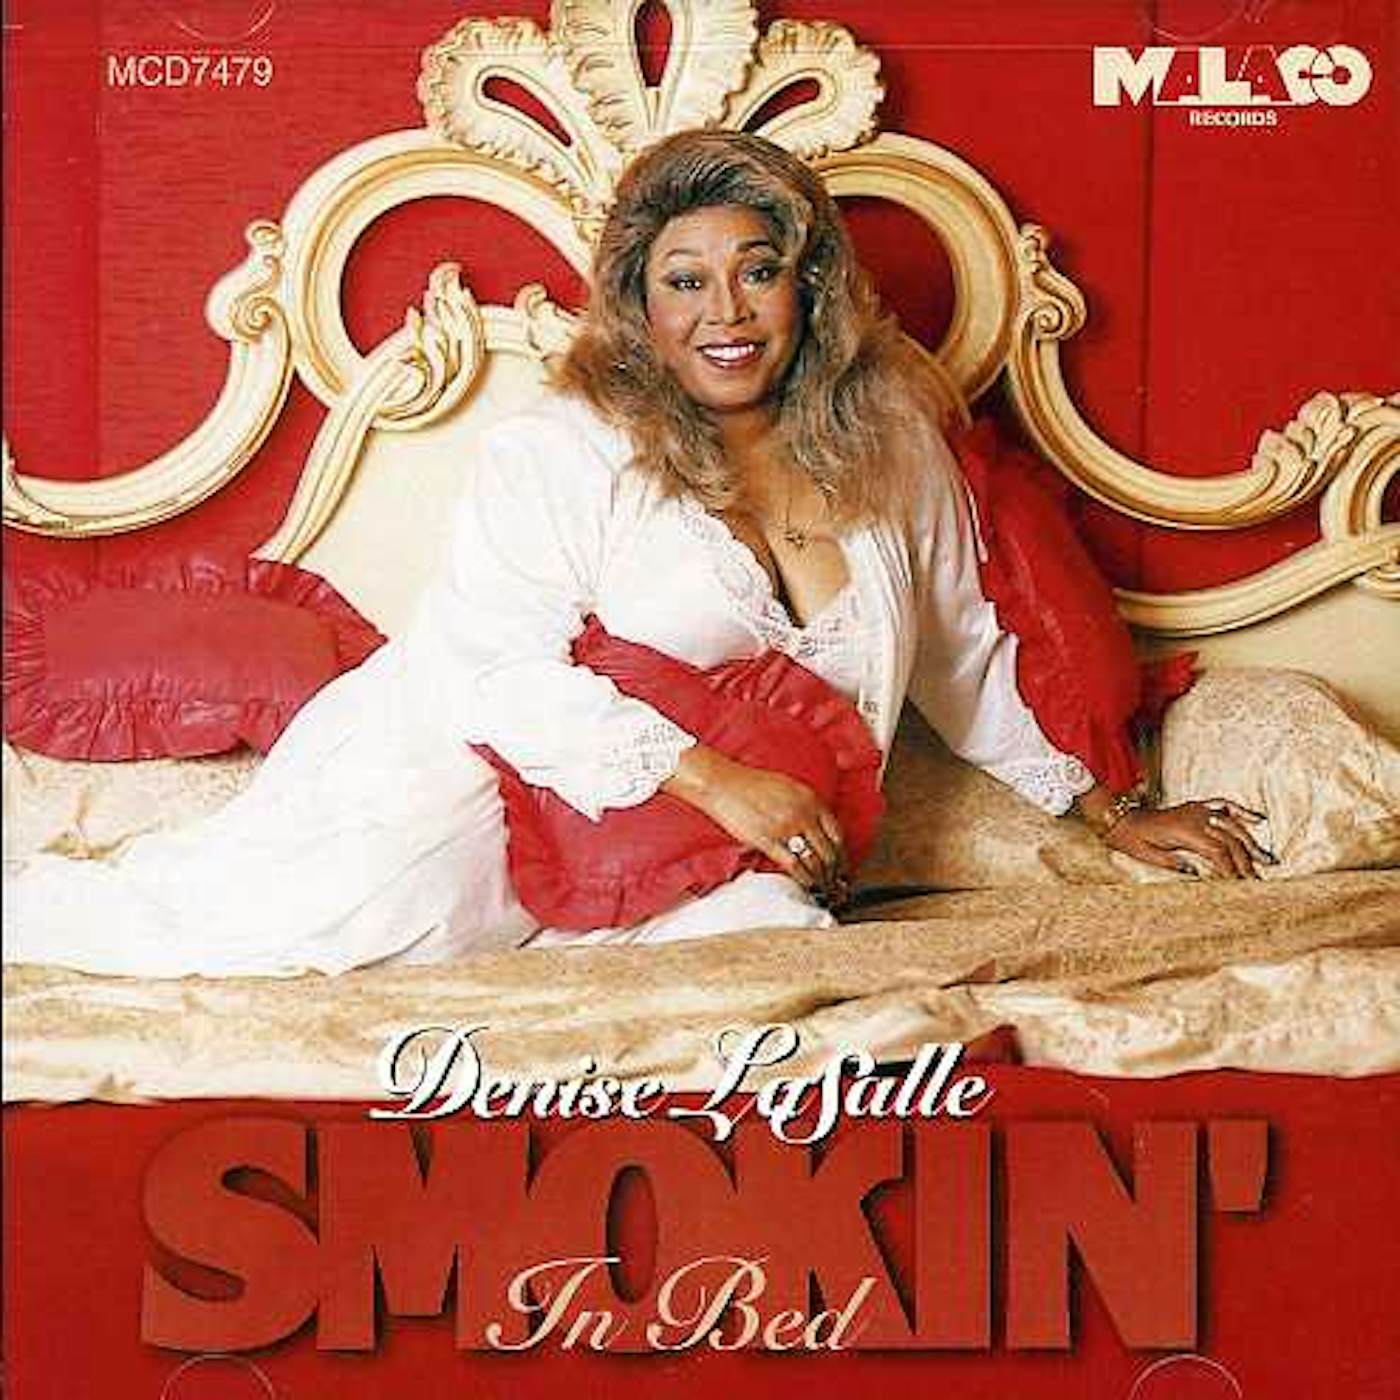 EEE TEE - song and lyrics by Denise LaSalle